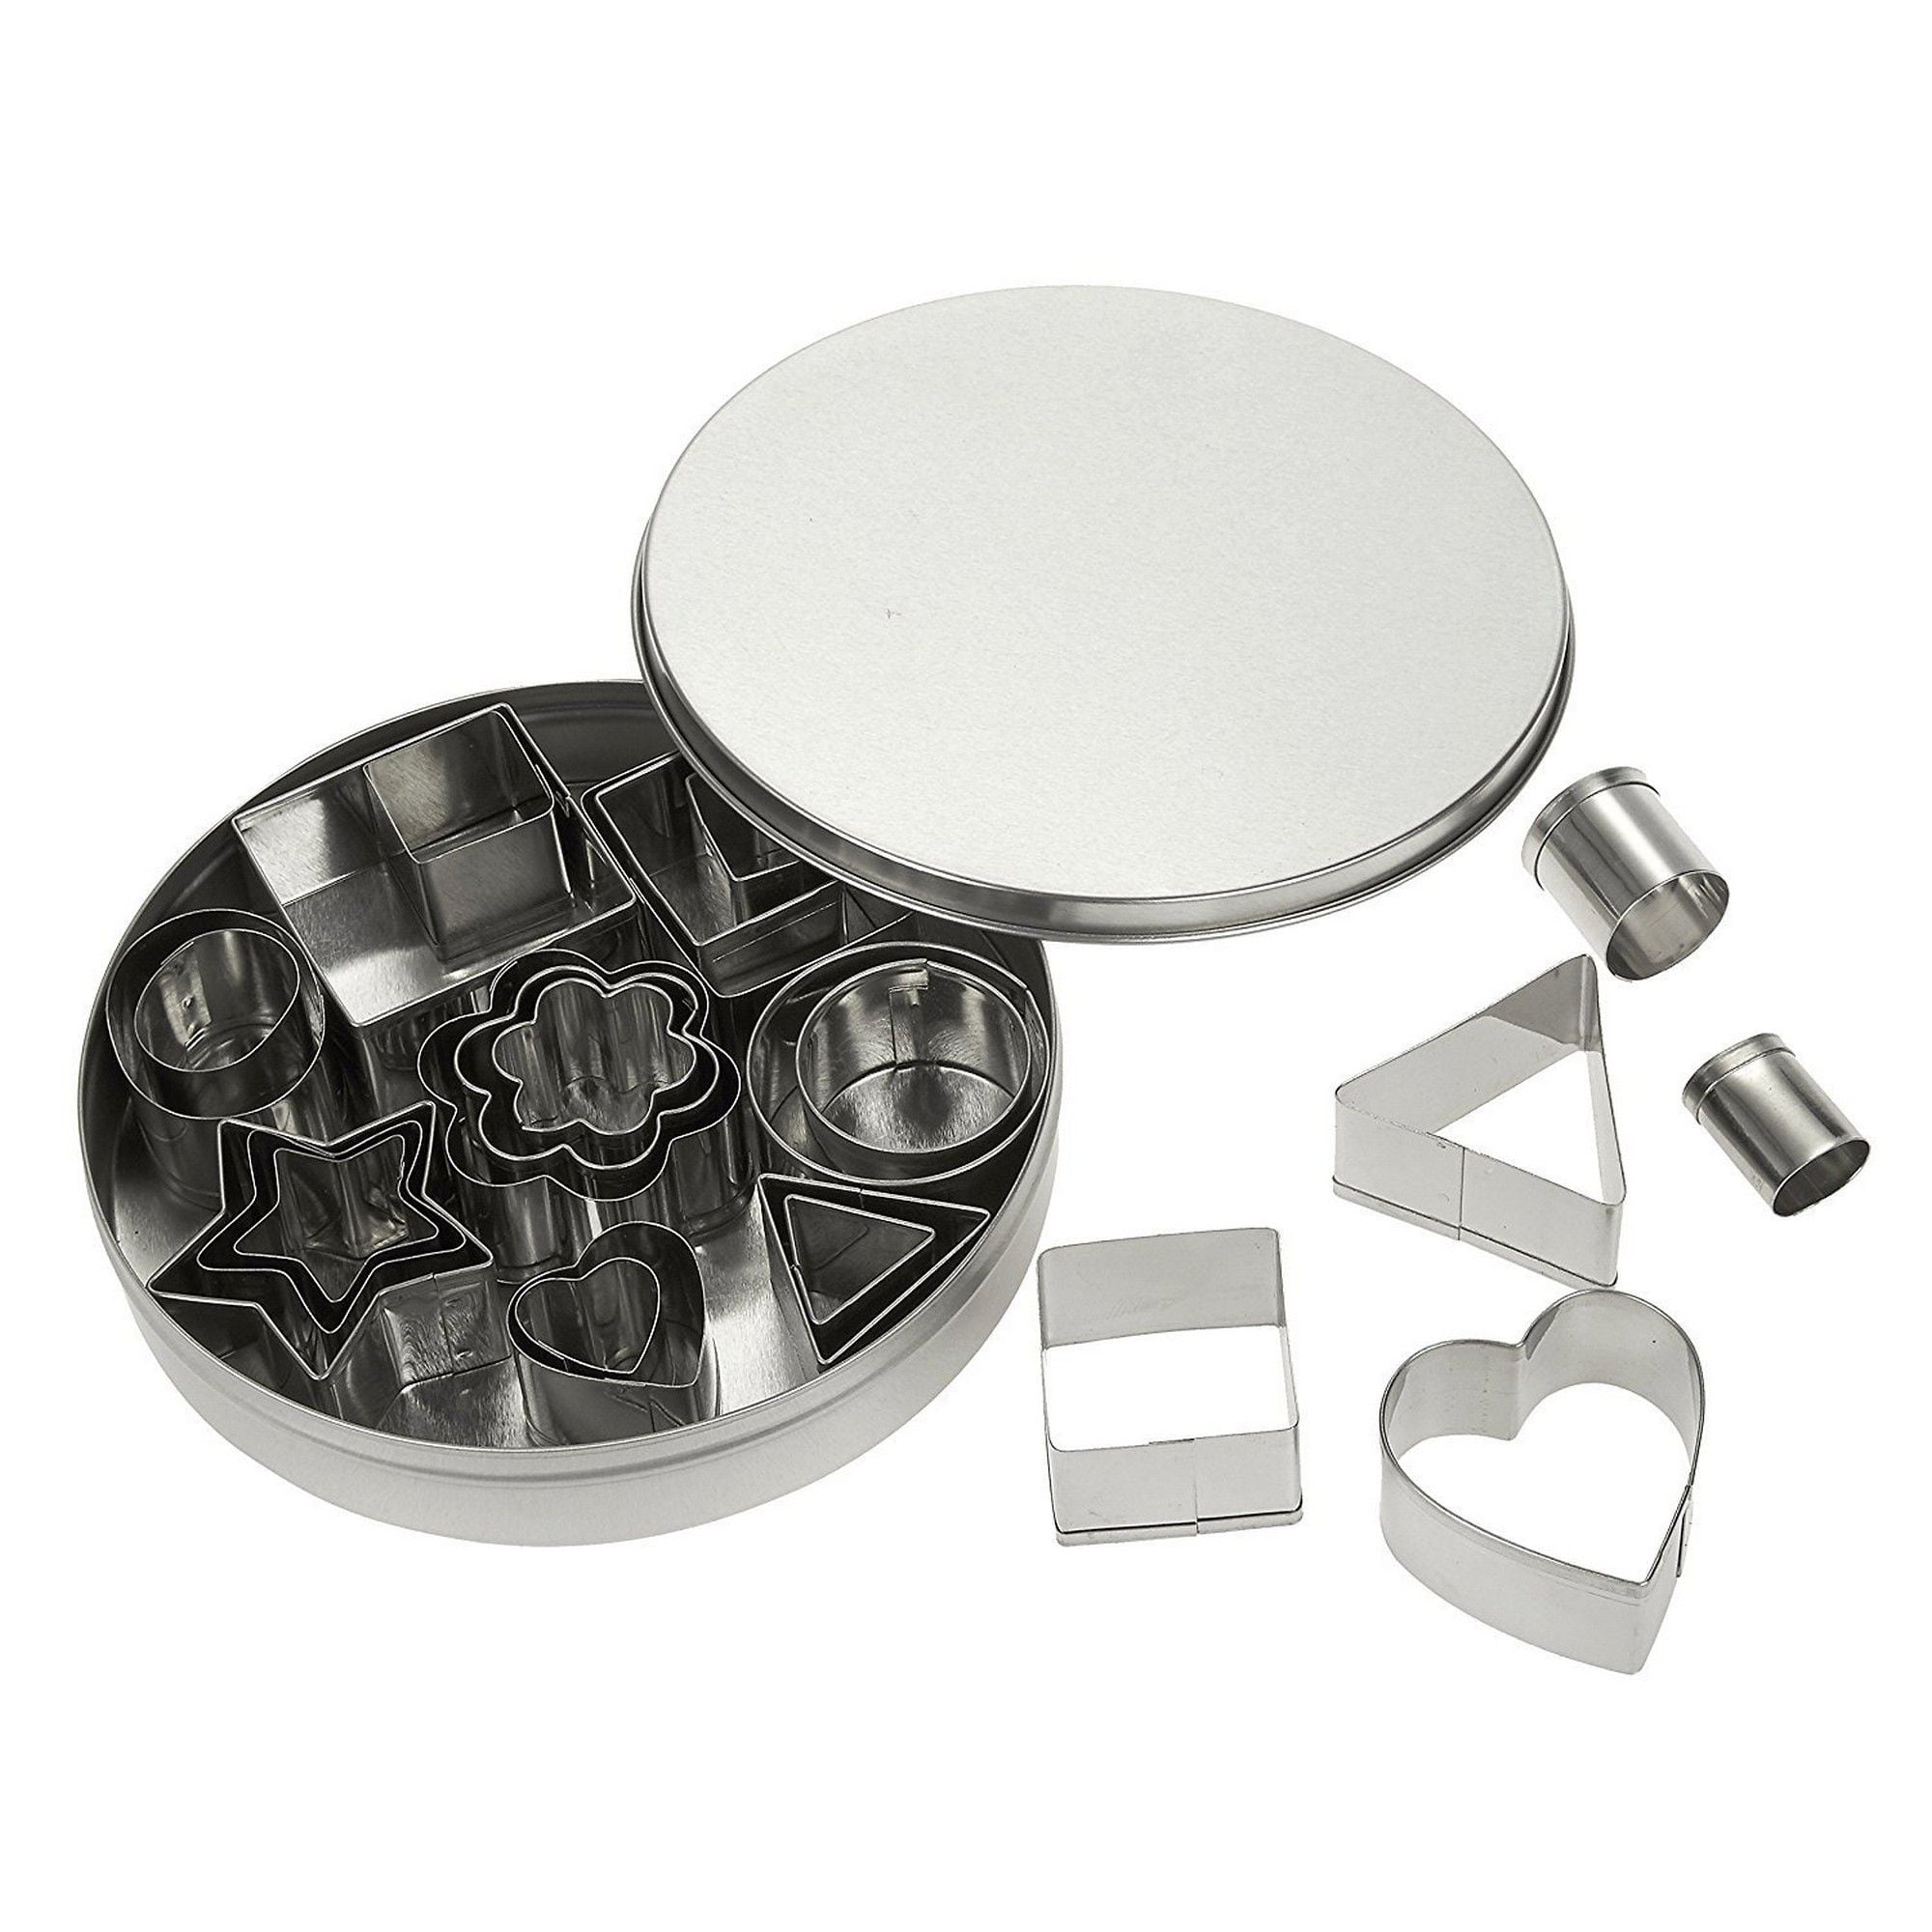 Cookie Cutter Set 24 Piece Mini Stainless Steel Biscuit